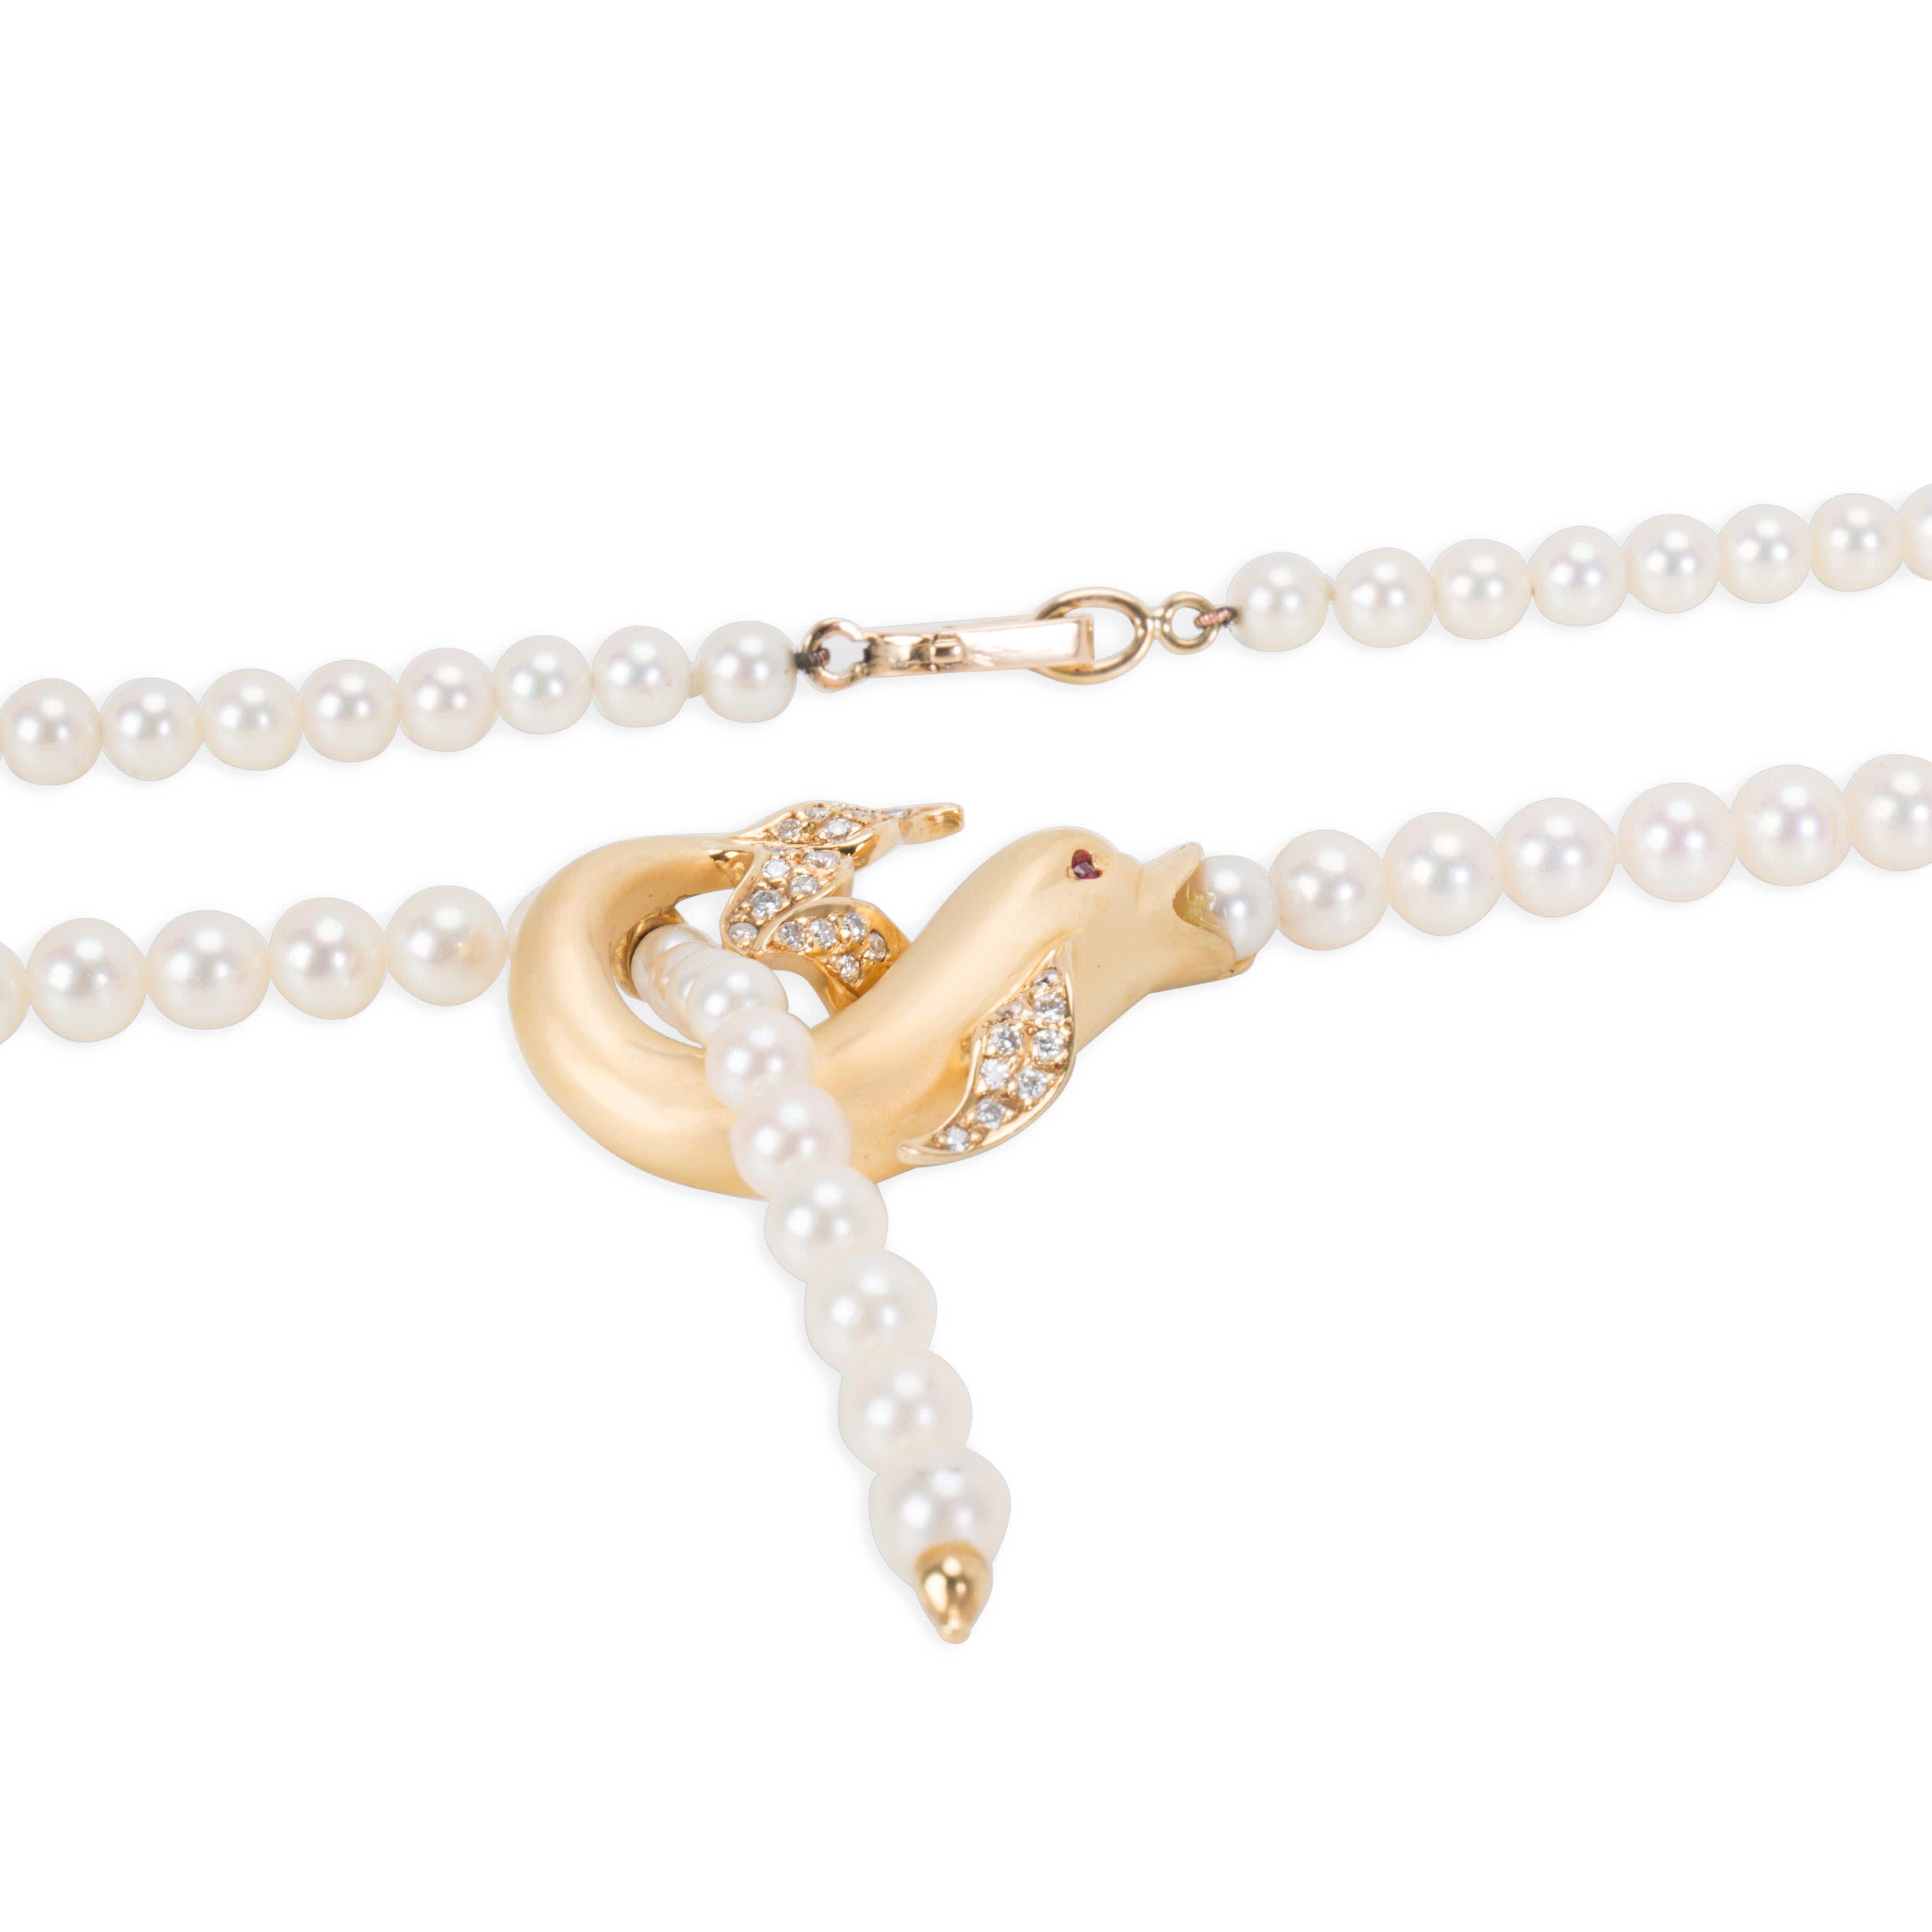 Women's Carrera y Carrera Diamond Textured Dolphin Necklace in 18K Yellow Gold 0.15 CTW